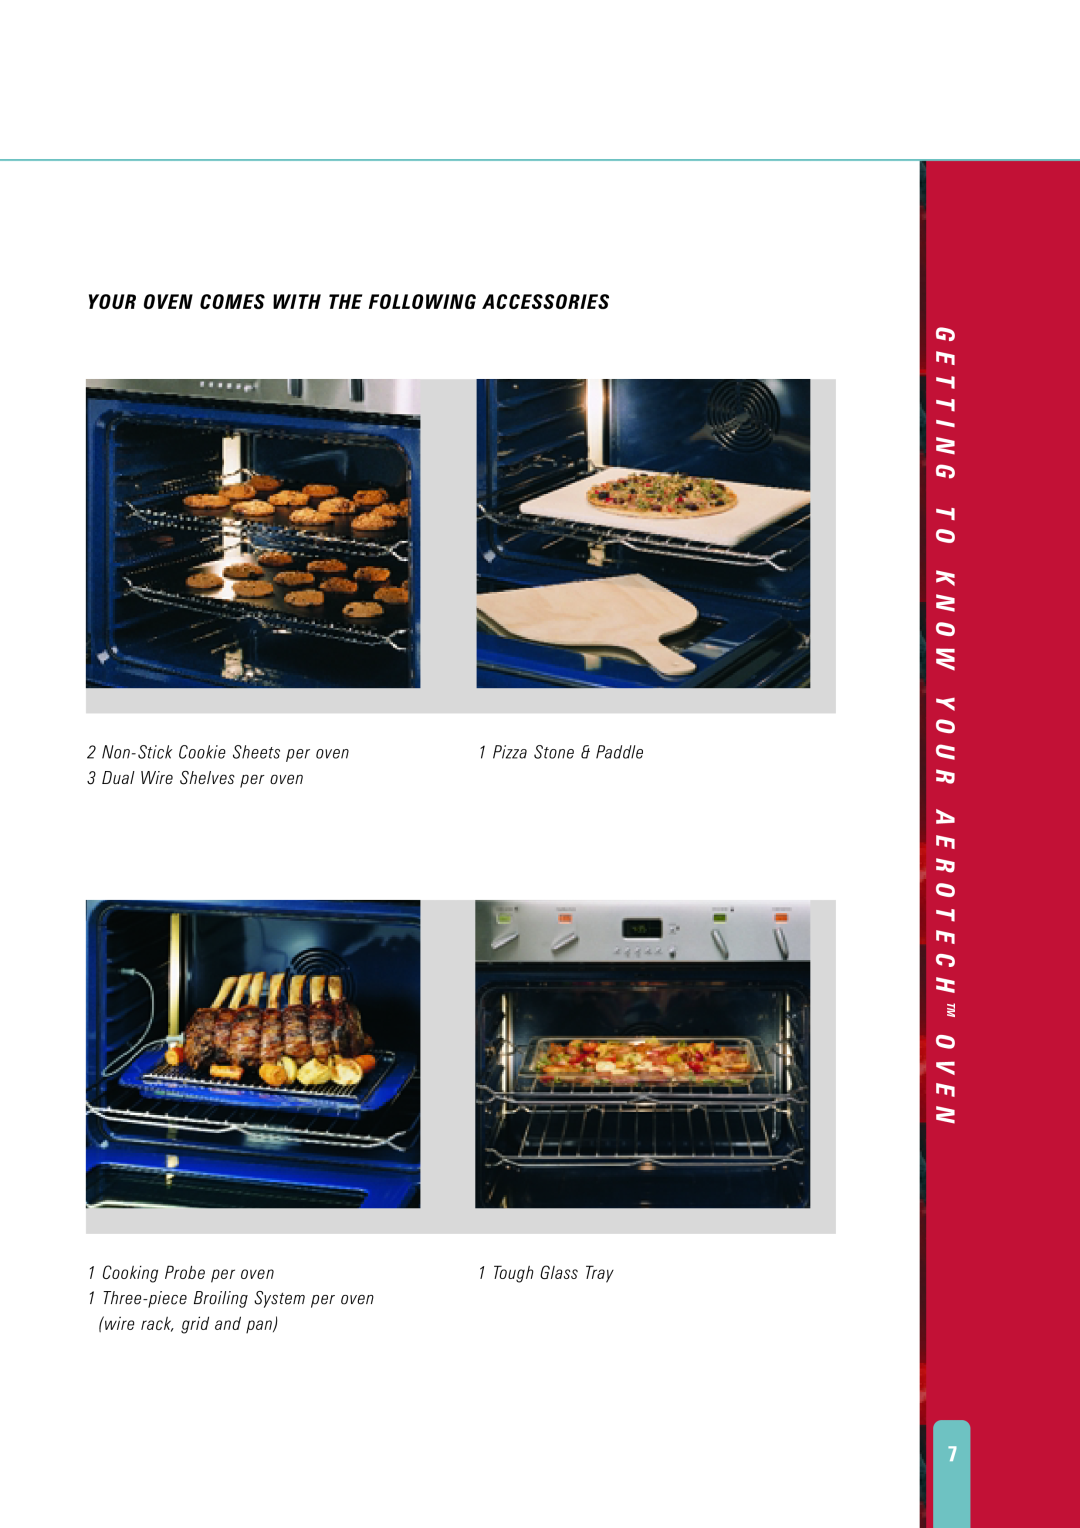 Fisher & Paykel AeroTech manual G E T T I N G T O K N O W Y O U R A E R O T E C H Tm O V E N, Tough Glass Tray 